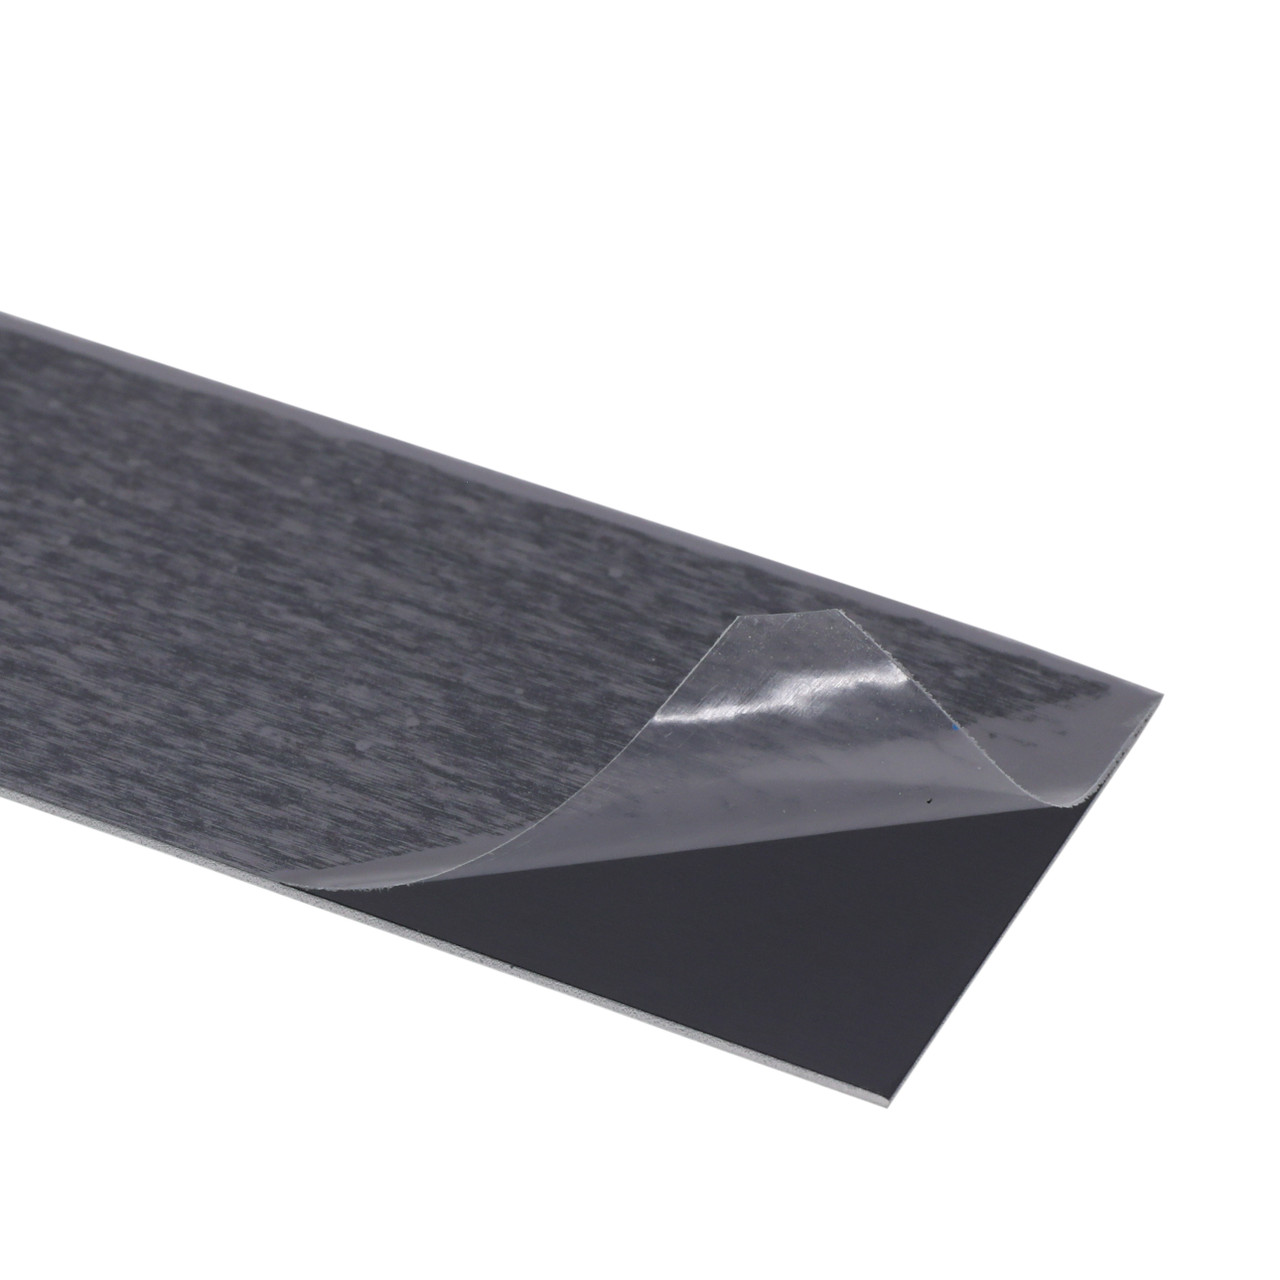 Black Anodized Aluminum sheets. 0.040 and more